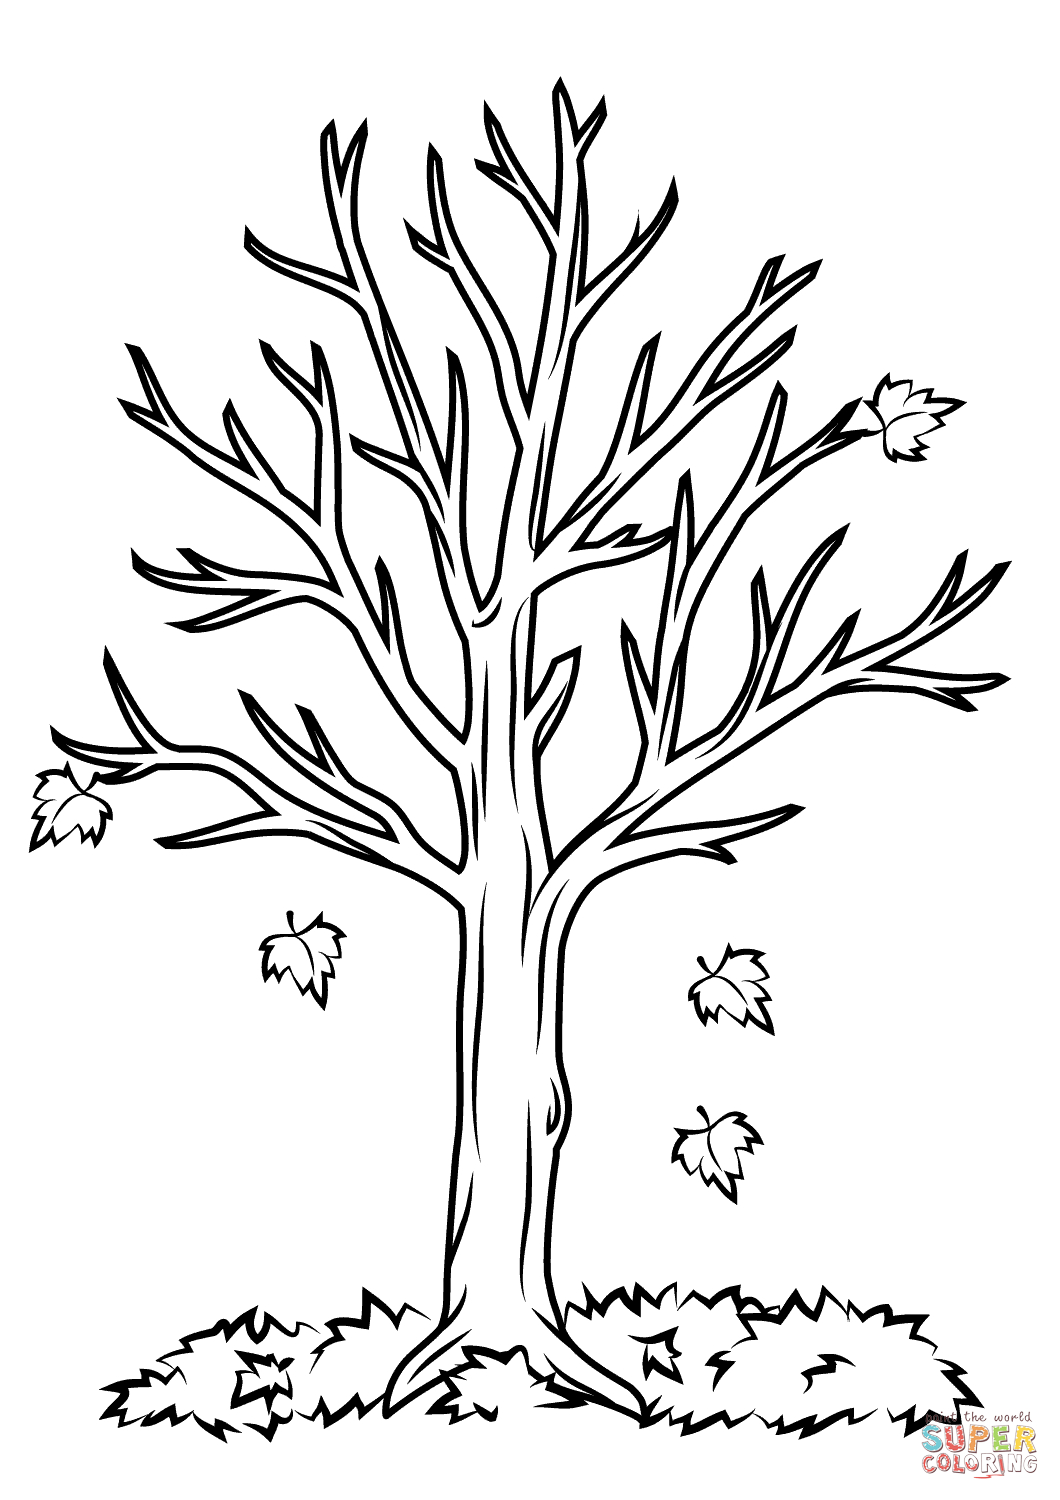 Fall Tree Coloring Page | Free Printable Coloring Pages - Tree Coloring Pages Free Printable